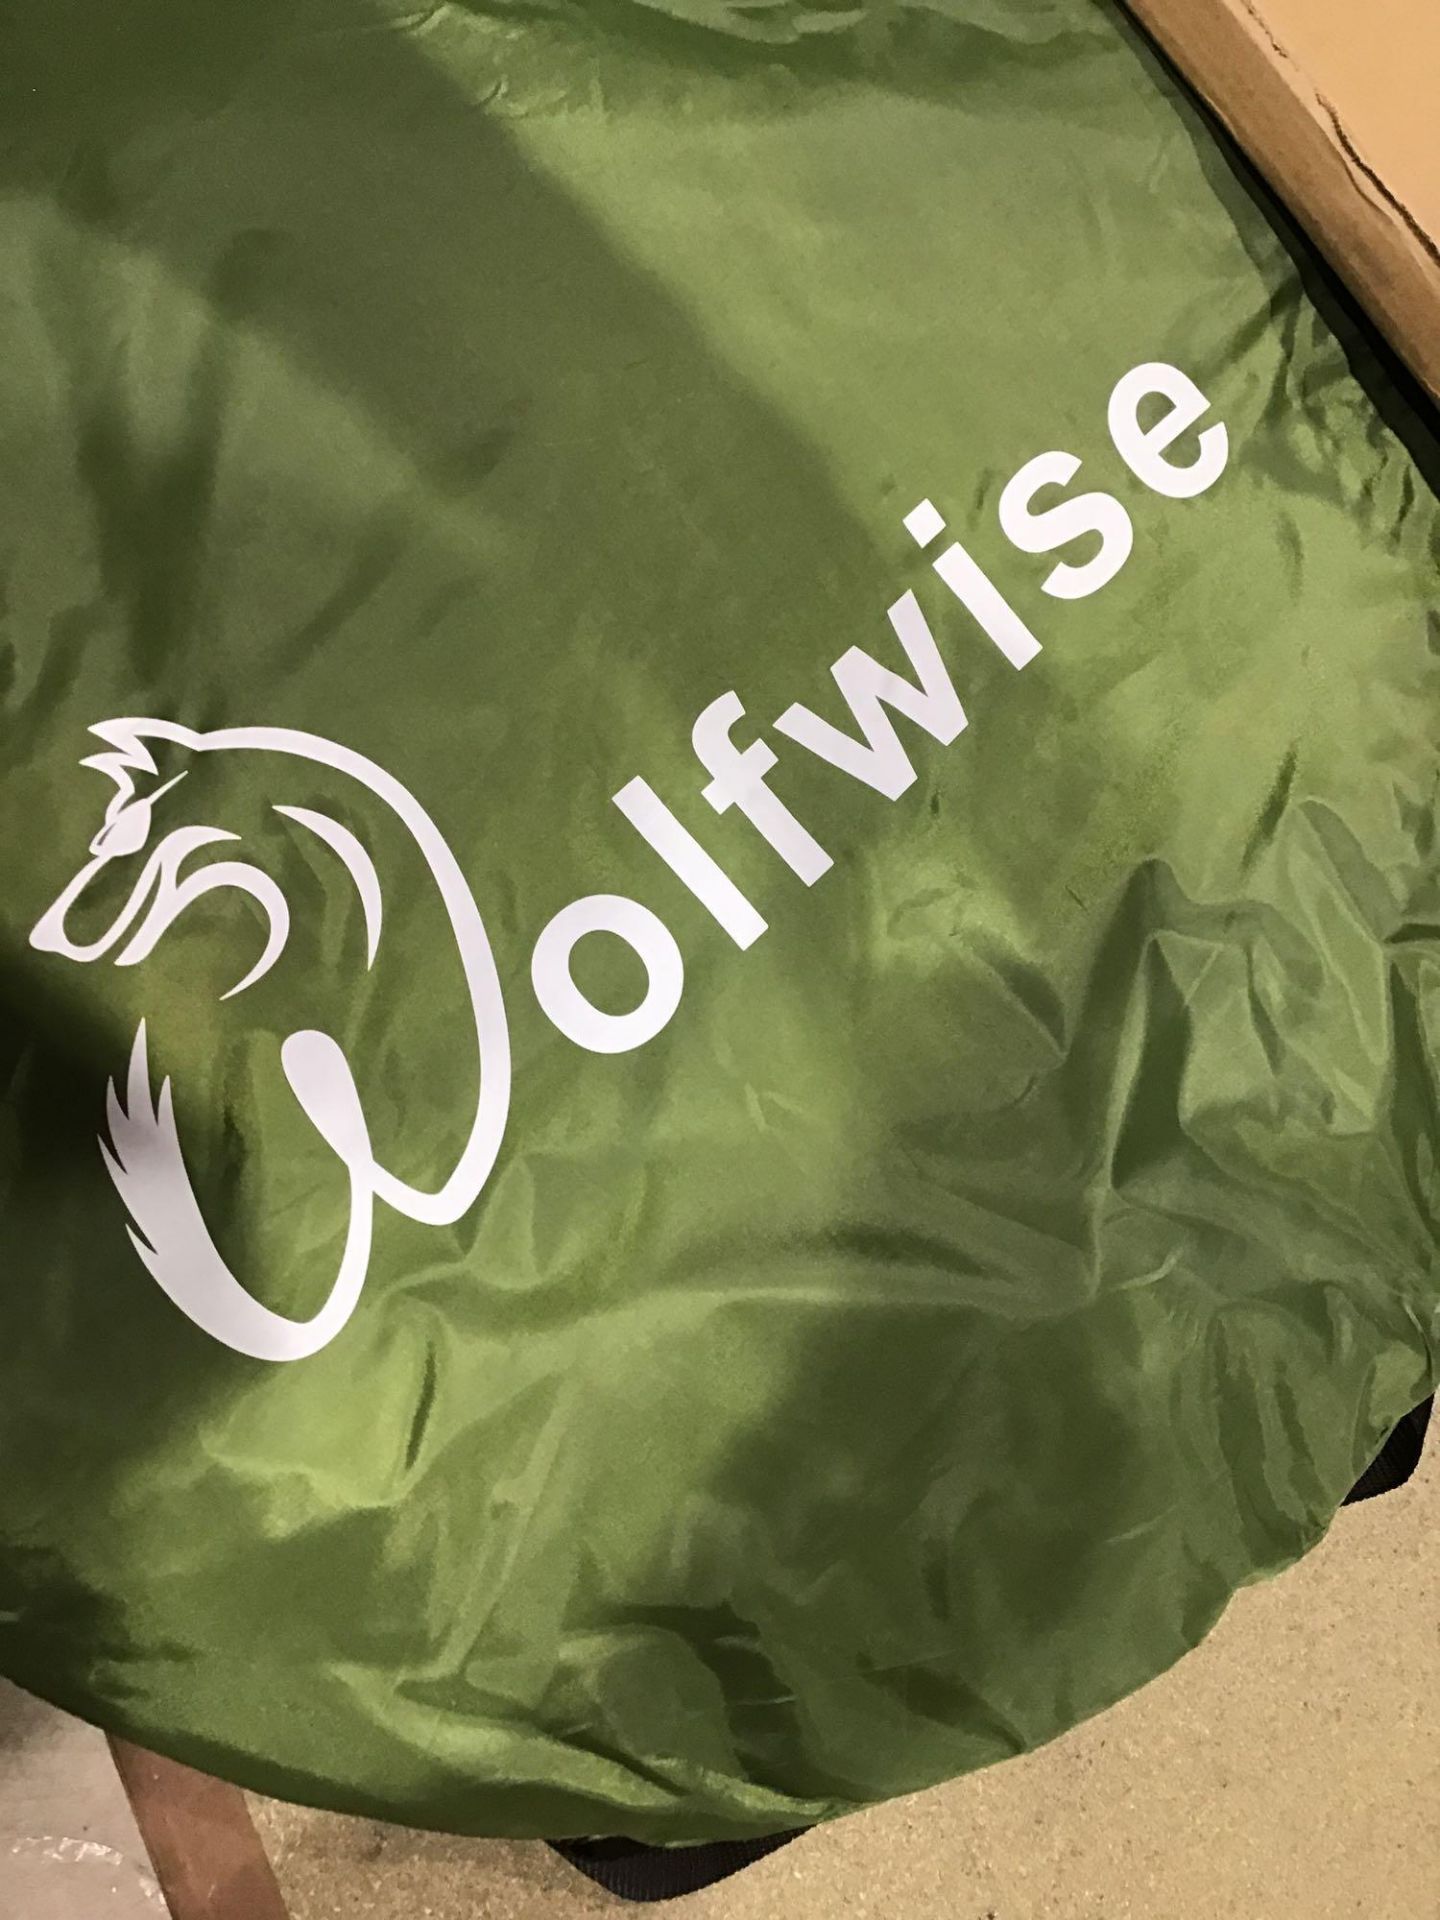 Miscellaneous General Merchandise - Wolfwise Product